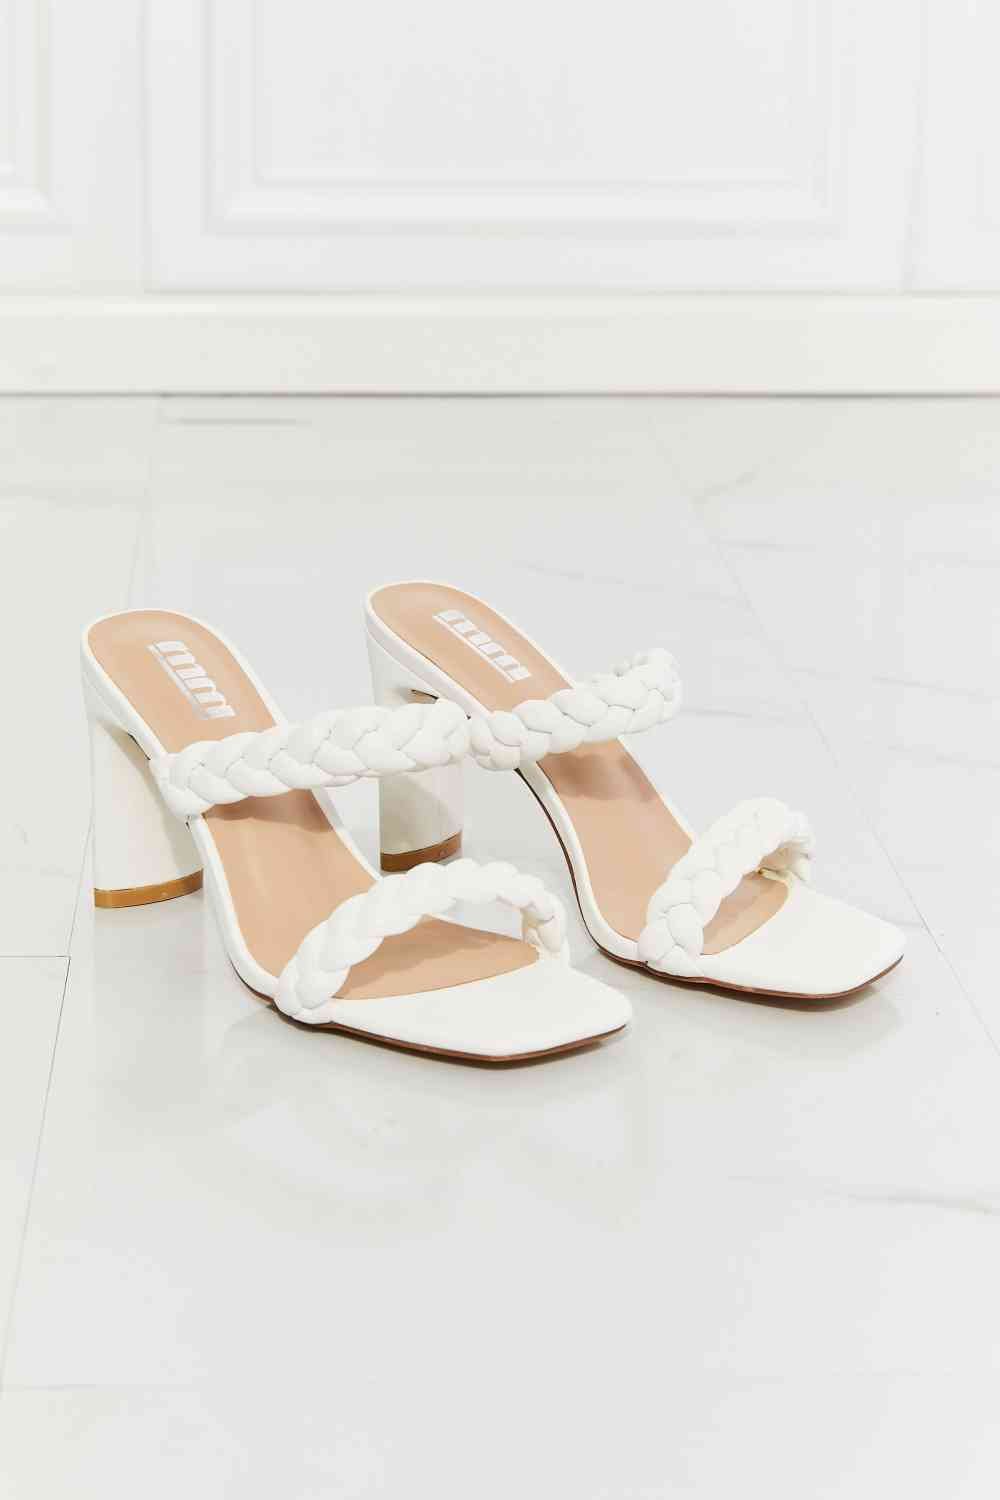 MMShoes In Love Double Braided Block Heel Sandal in White - Guy Christopher